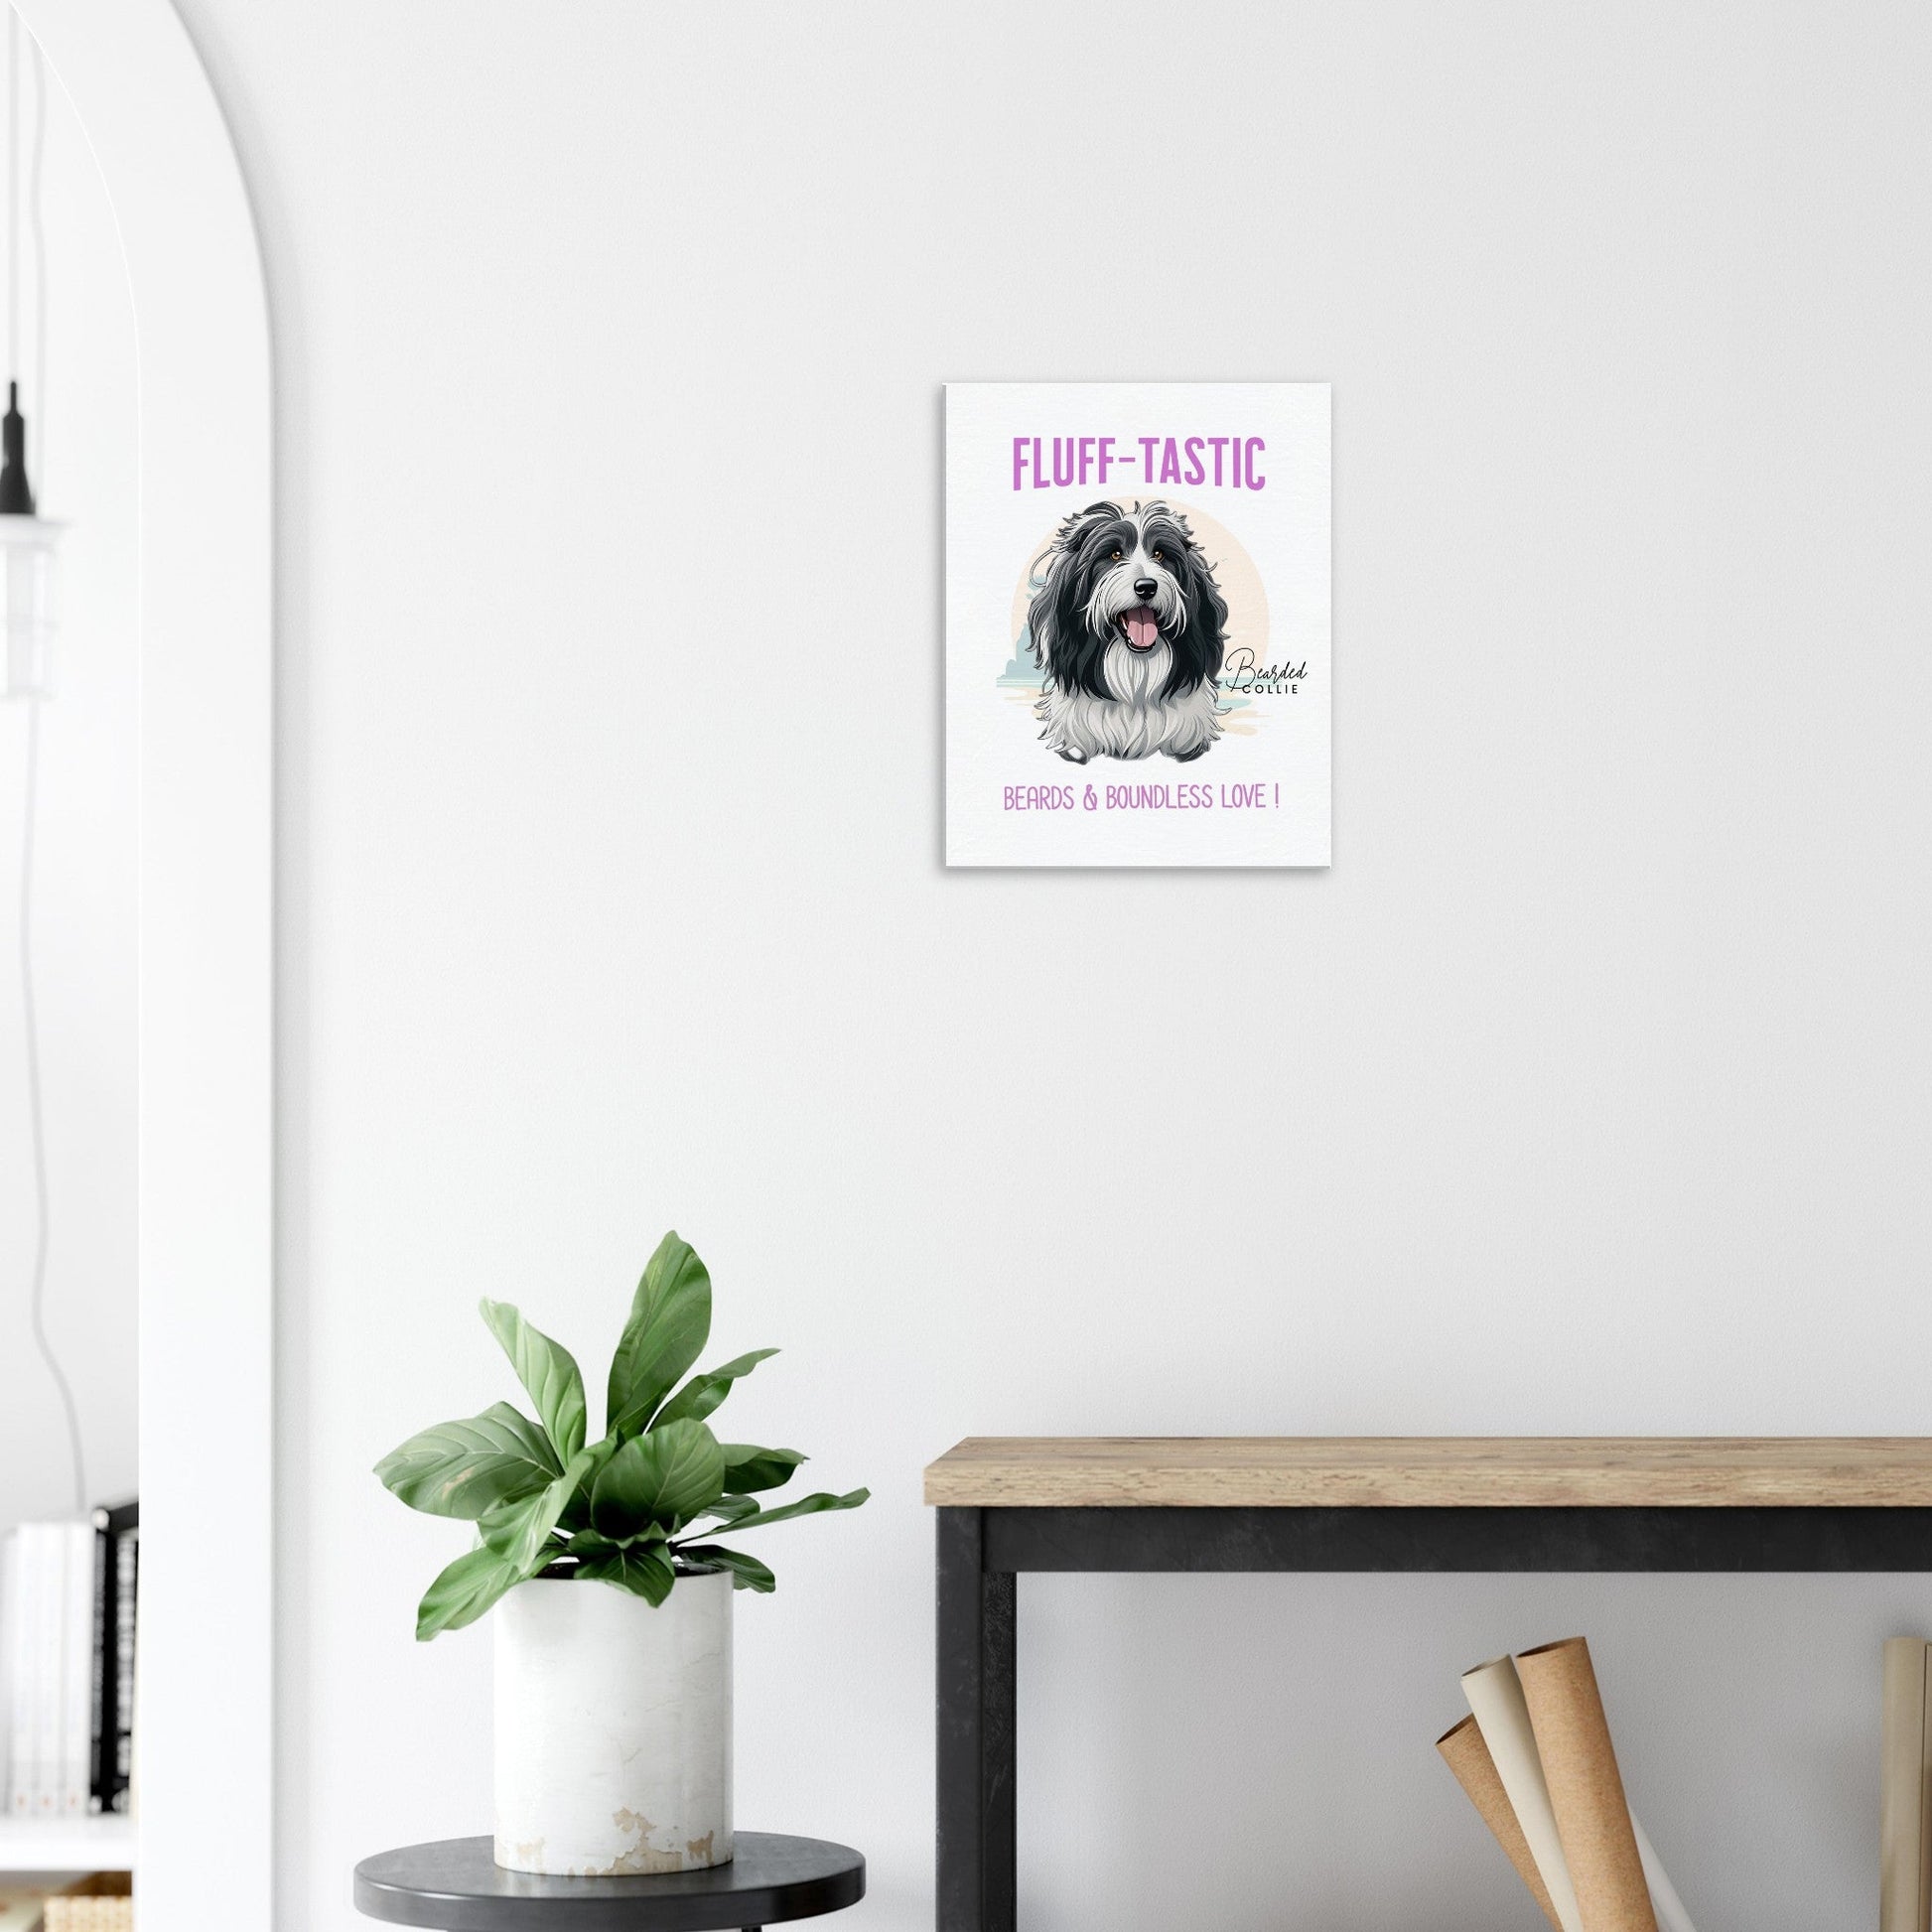 Bearded Collie Canvas Art - 16 by 20 Frame59.99-(FREE Delivery) Shop now at itsaboutmydog.com, bearded collie, Bearded Collie art, Bearded Collie lover